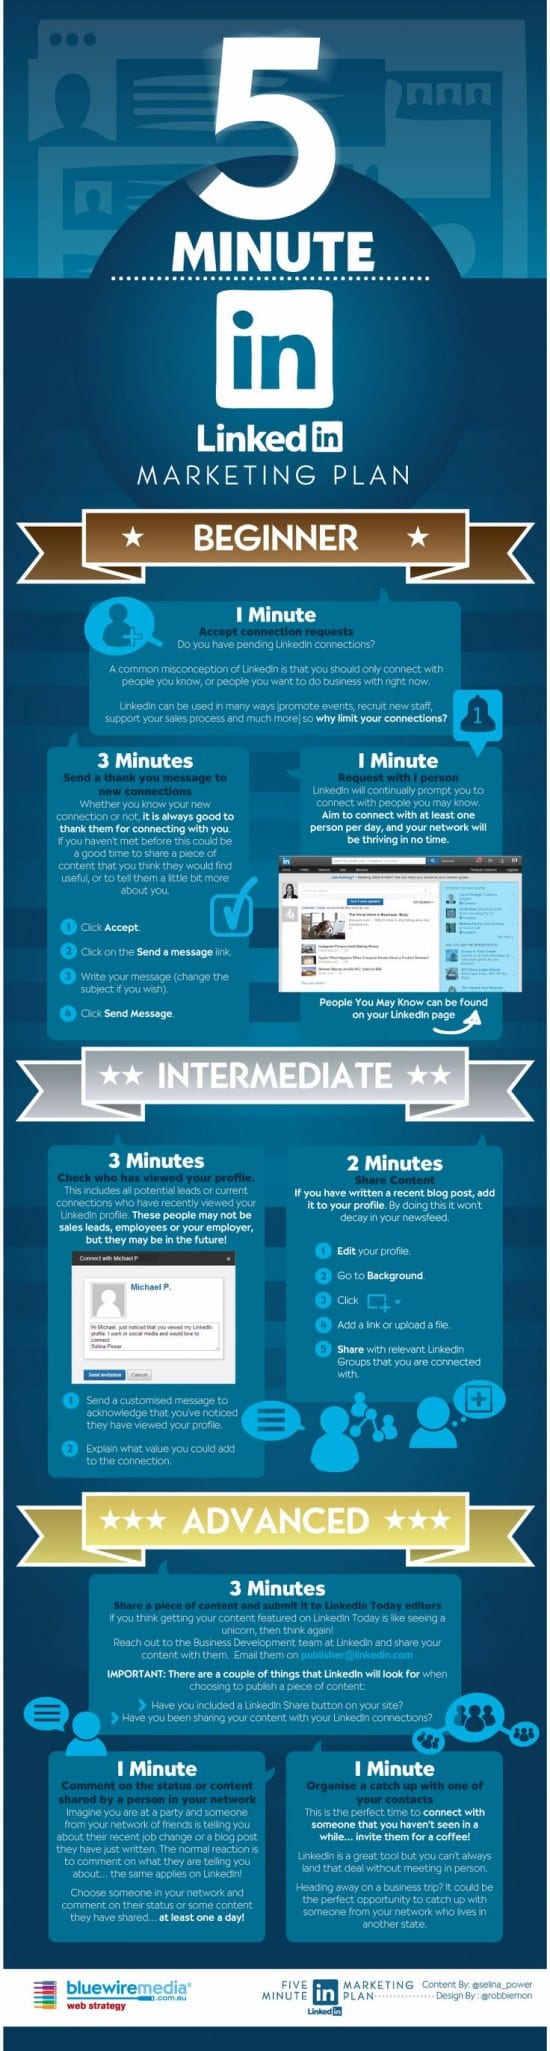 Expanding your LinkedIn connections Infographic